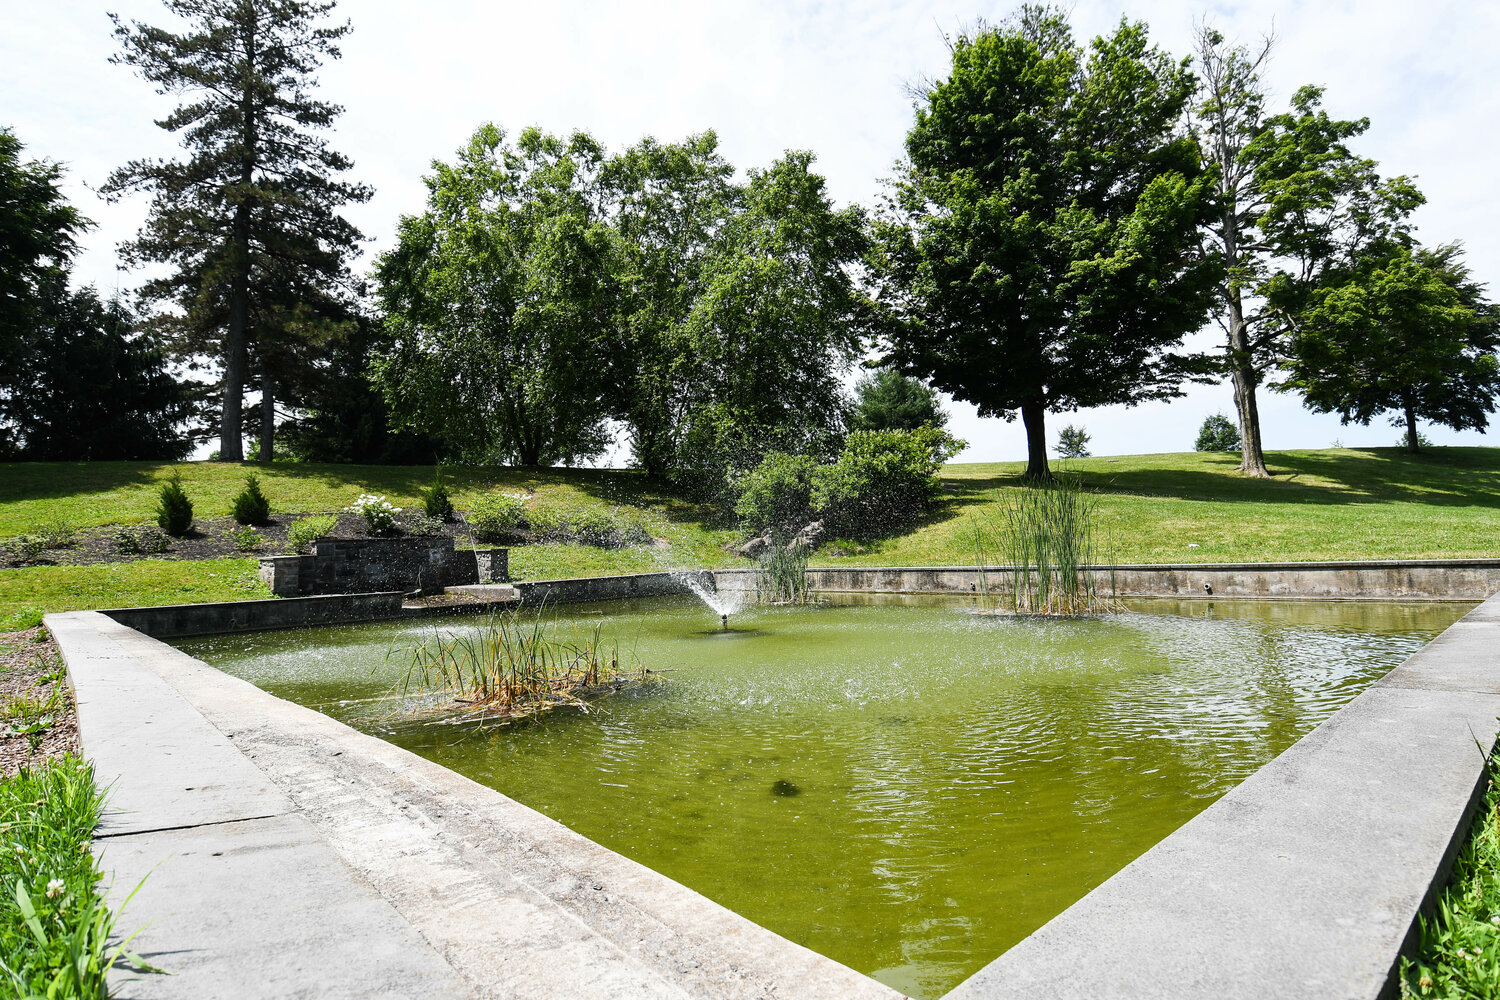 One of the signature features of Frederick T. Proctor Park, the Lily Pond, is shown in this photo from July 2022.